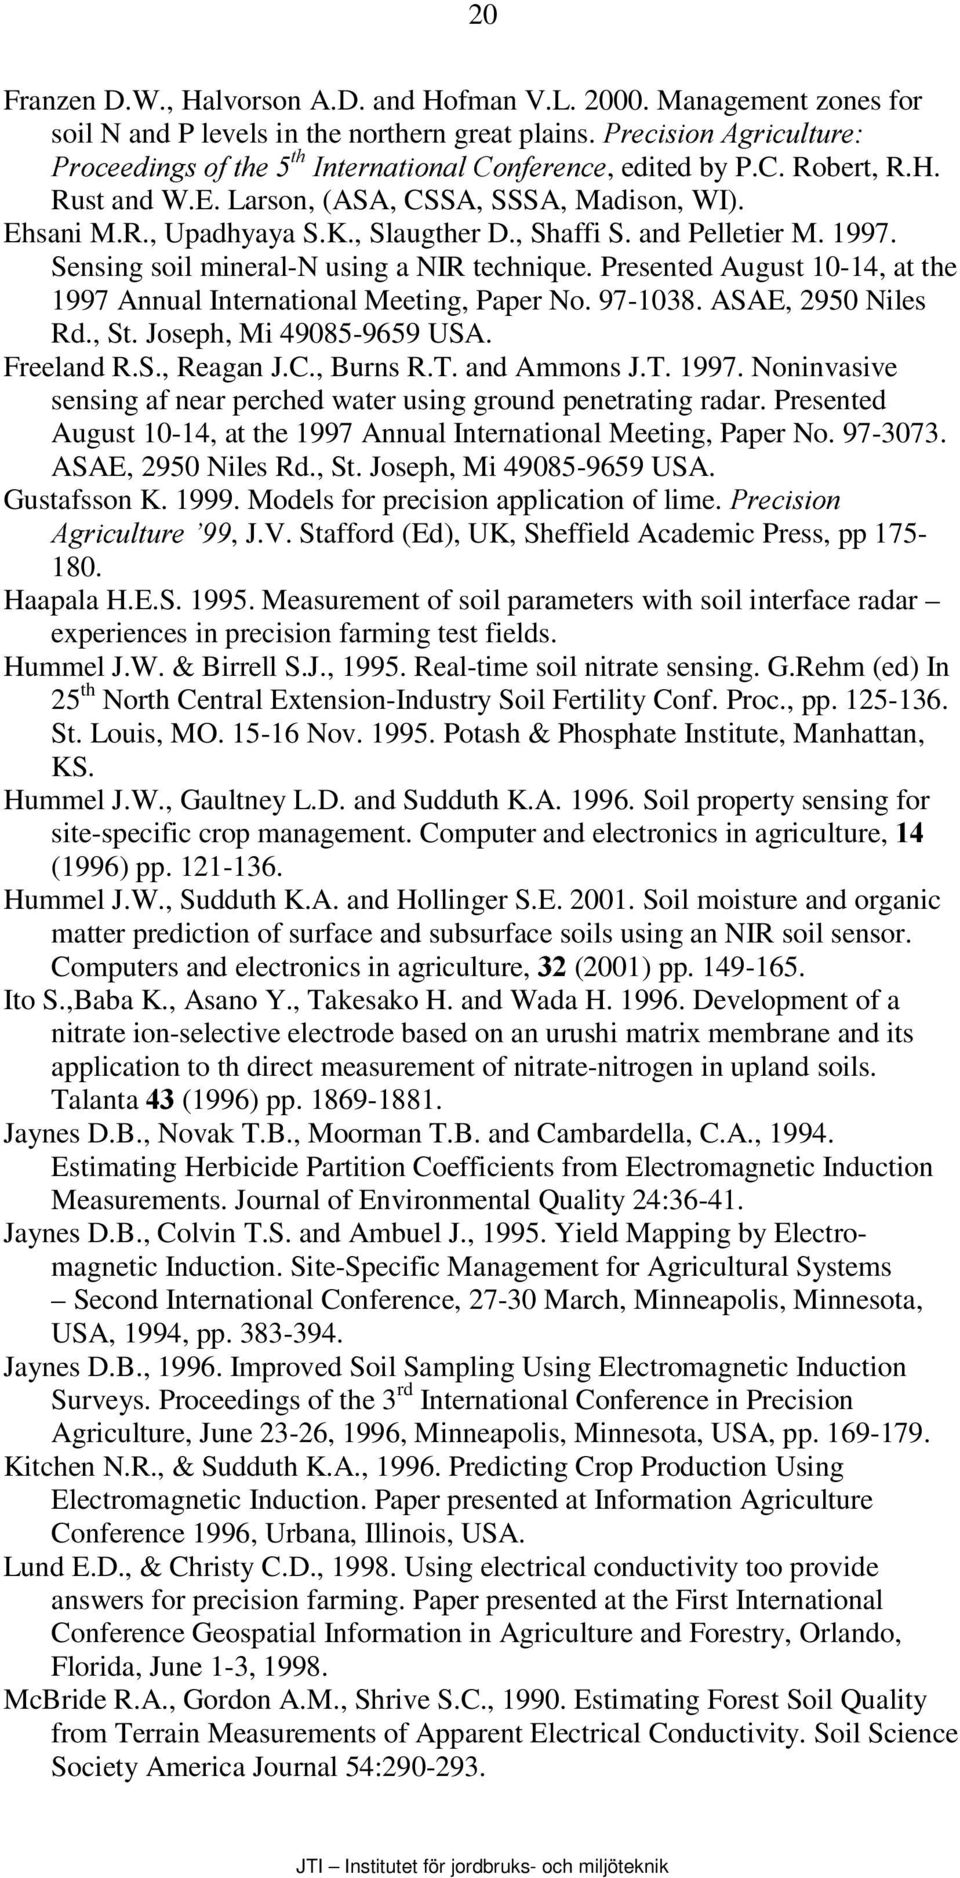 , Shaffi S. and Pelletier M. 1997. Sensing soil mineral-n using a NIR technique. Presented August 10-14, at the 1997 Annual International Meeting, Paper No. 97-1038. ASAE, 2950 Niles Rd., St.